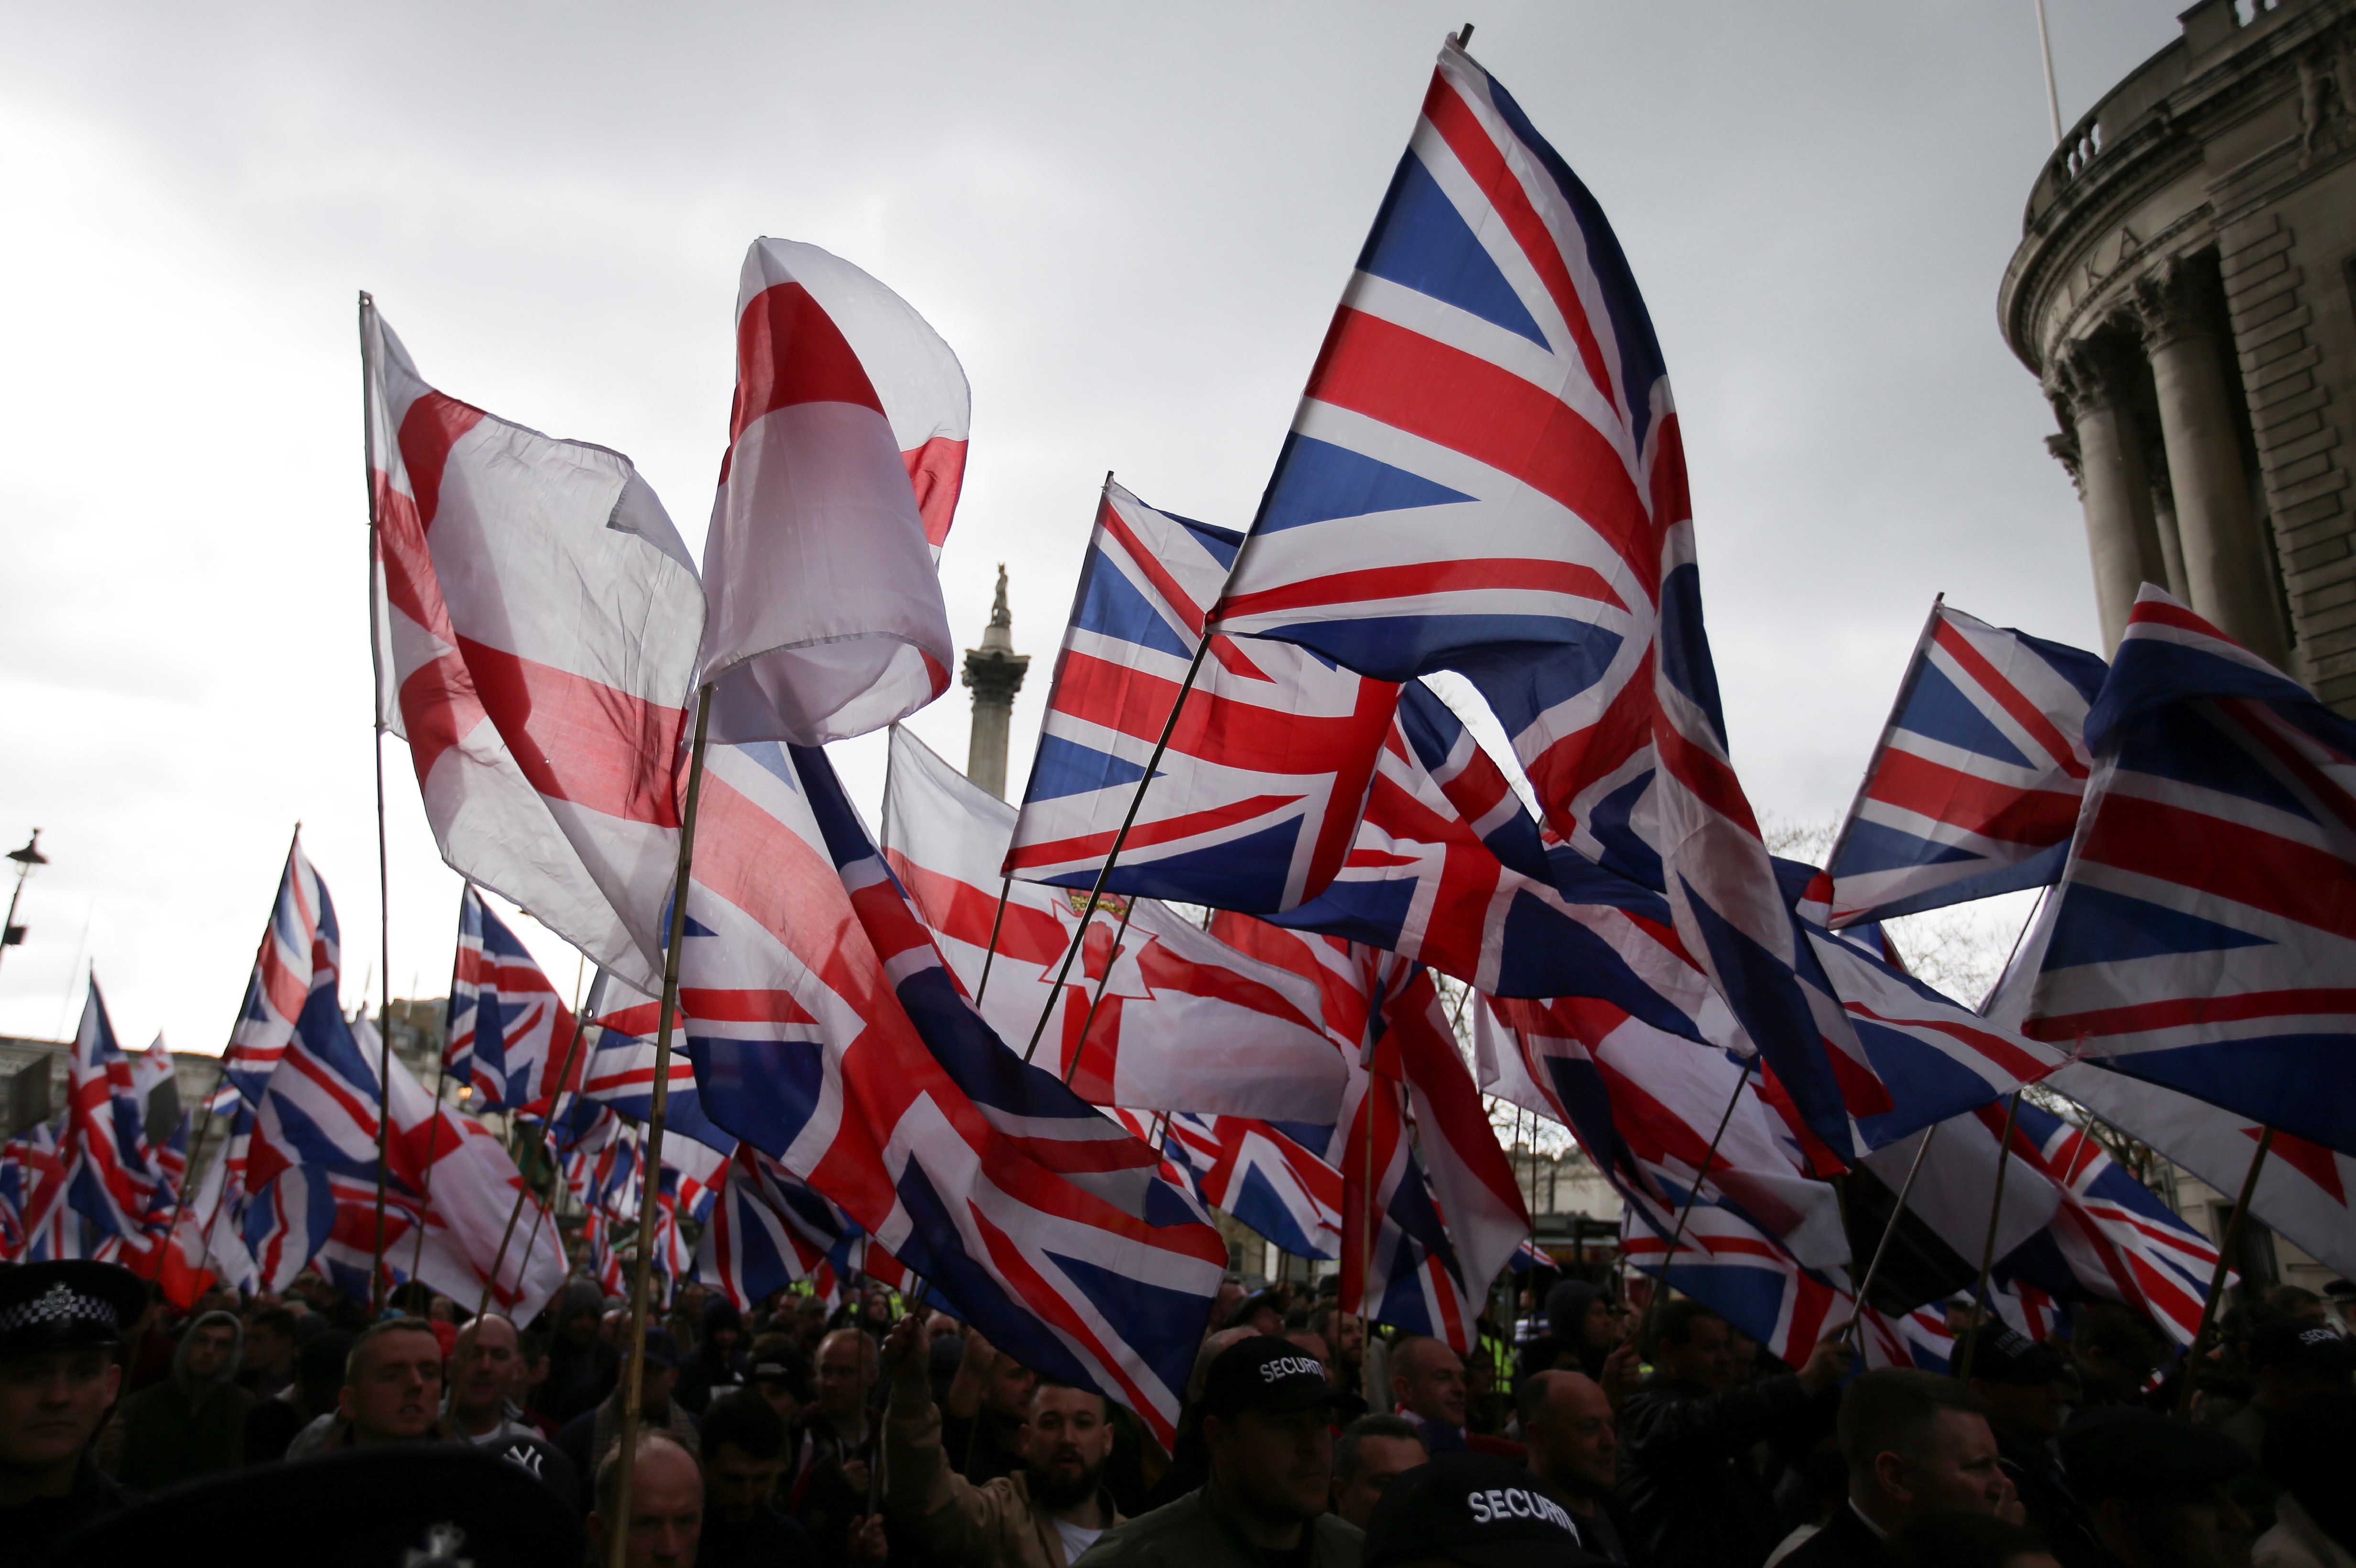 Supporters of the far-right group Britain First wave flags as they march and rally in central London on 1 April, 2017 (AFP) 